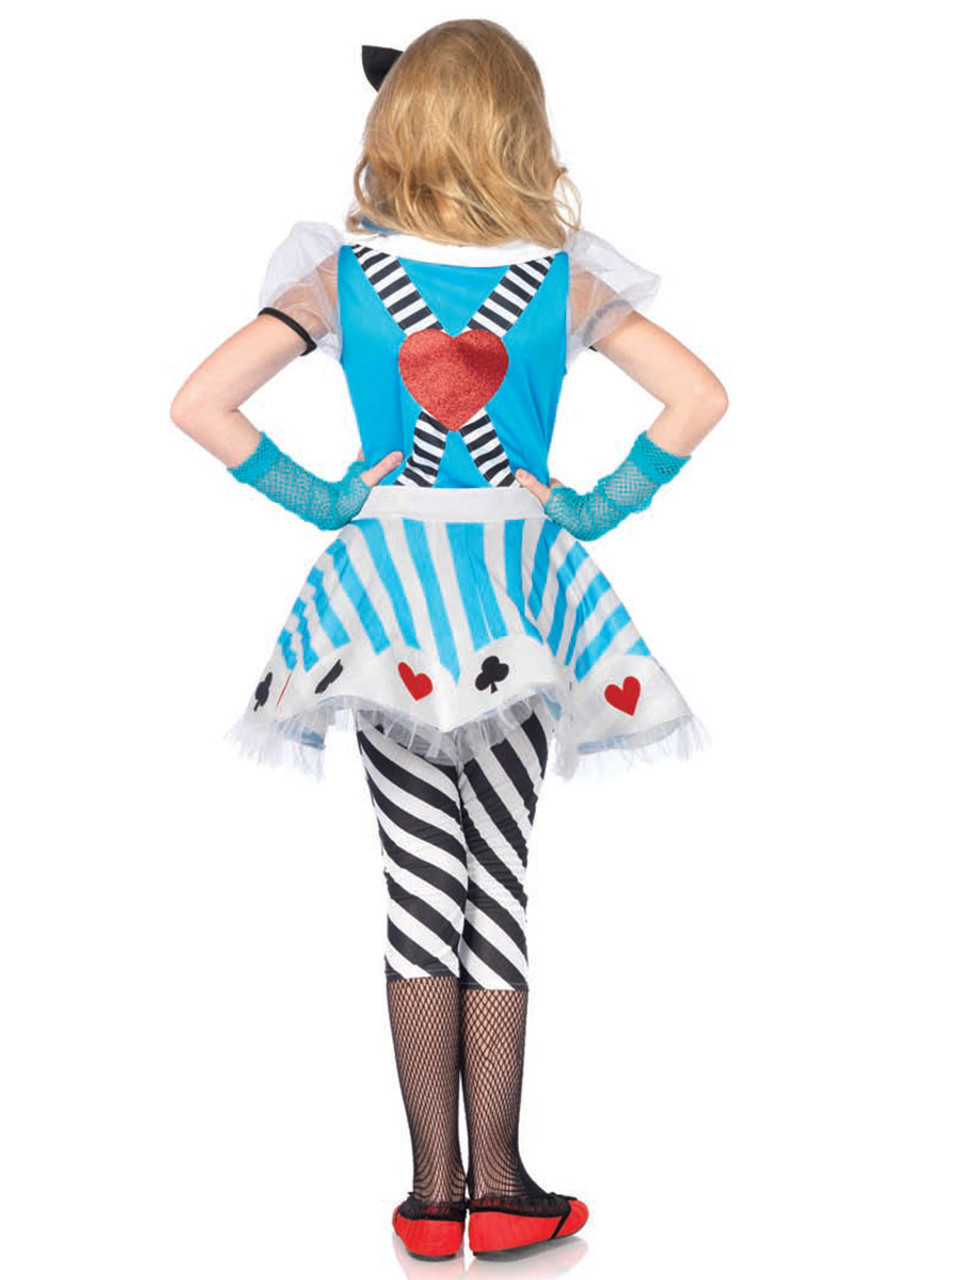 https://cdn11.bigcommerce.com/s-ccemqvqt2n/images/stencil/1280x1280/products/27333/51558/adorable-alice-3-pc-costume-22__78813.1626280317.jpg?c=1